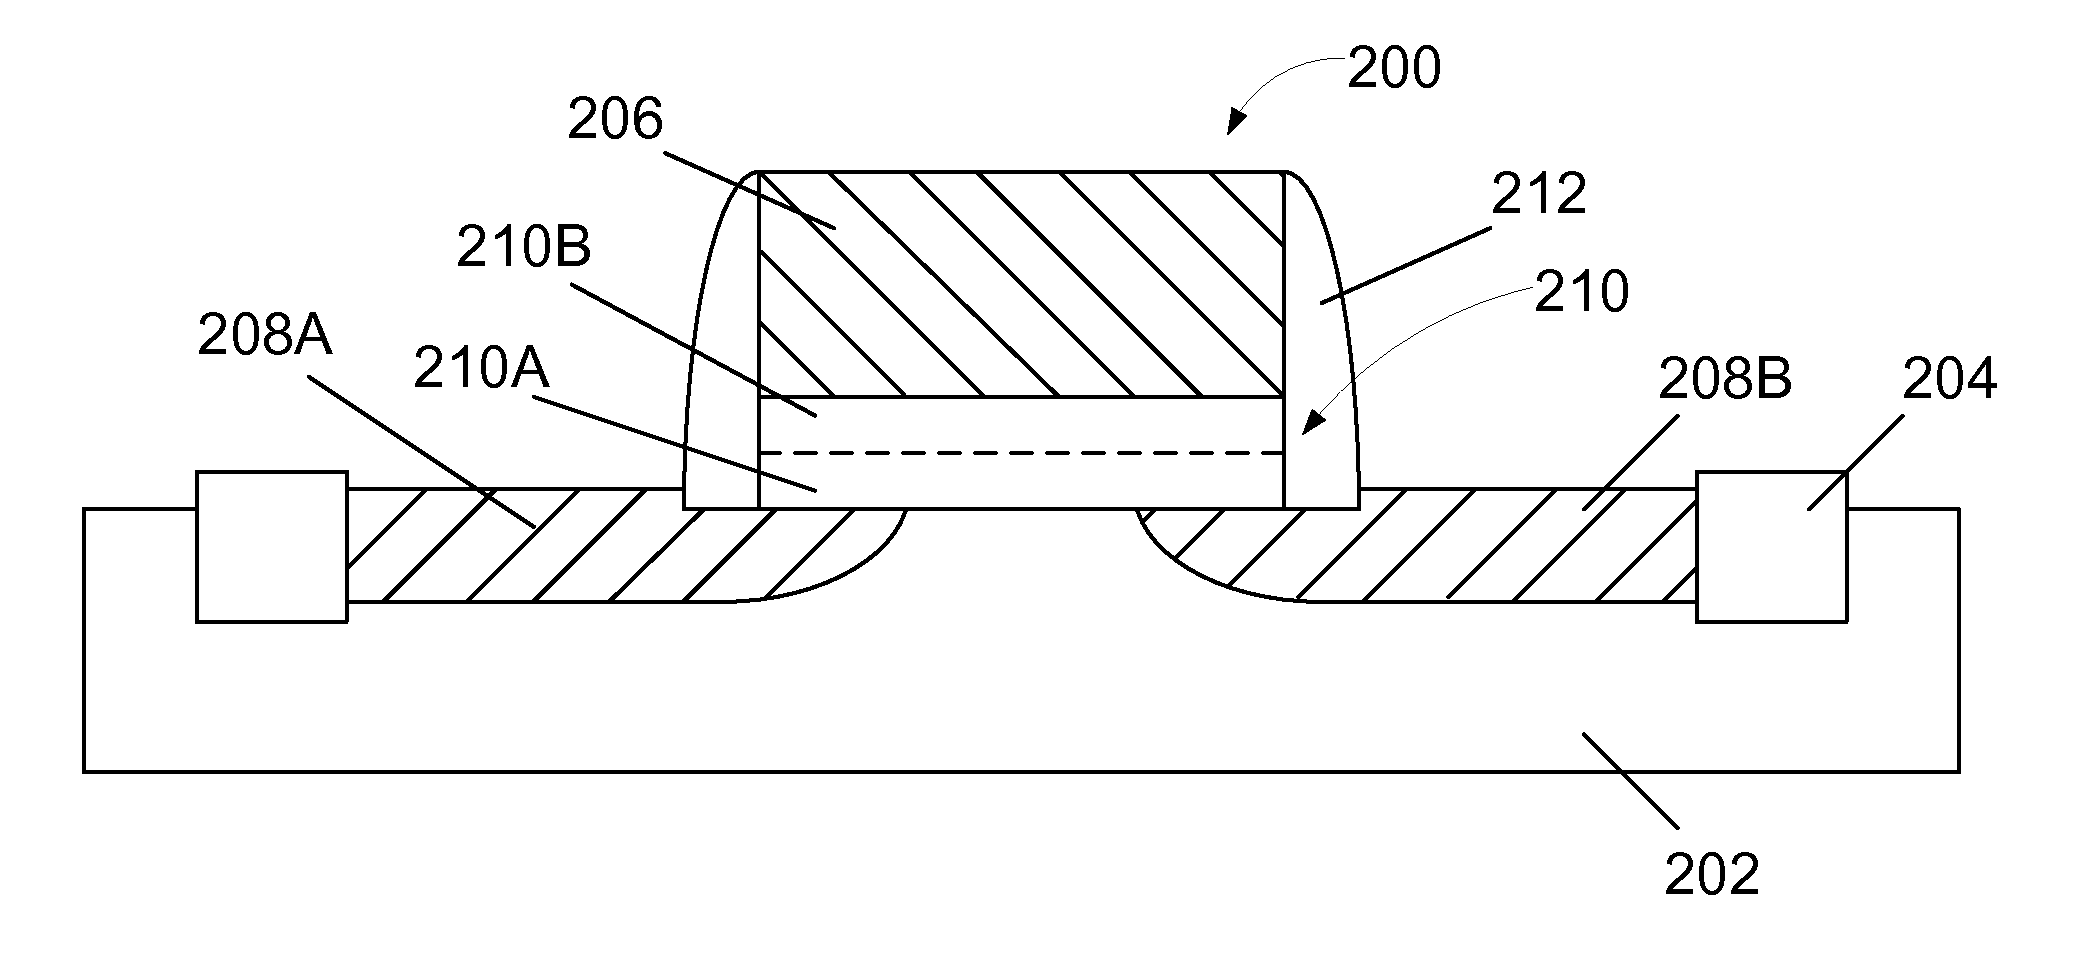 Fabrication of RRAM Cell Using CMOS Compatible Processes